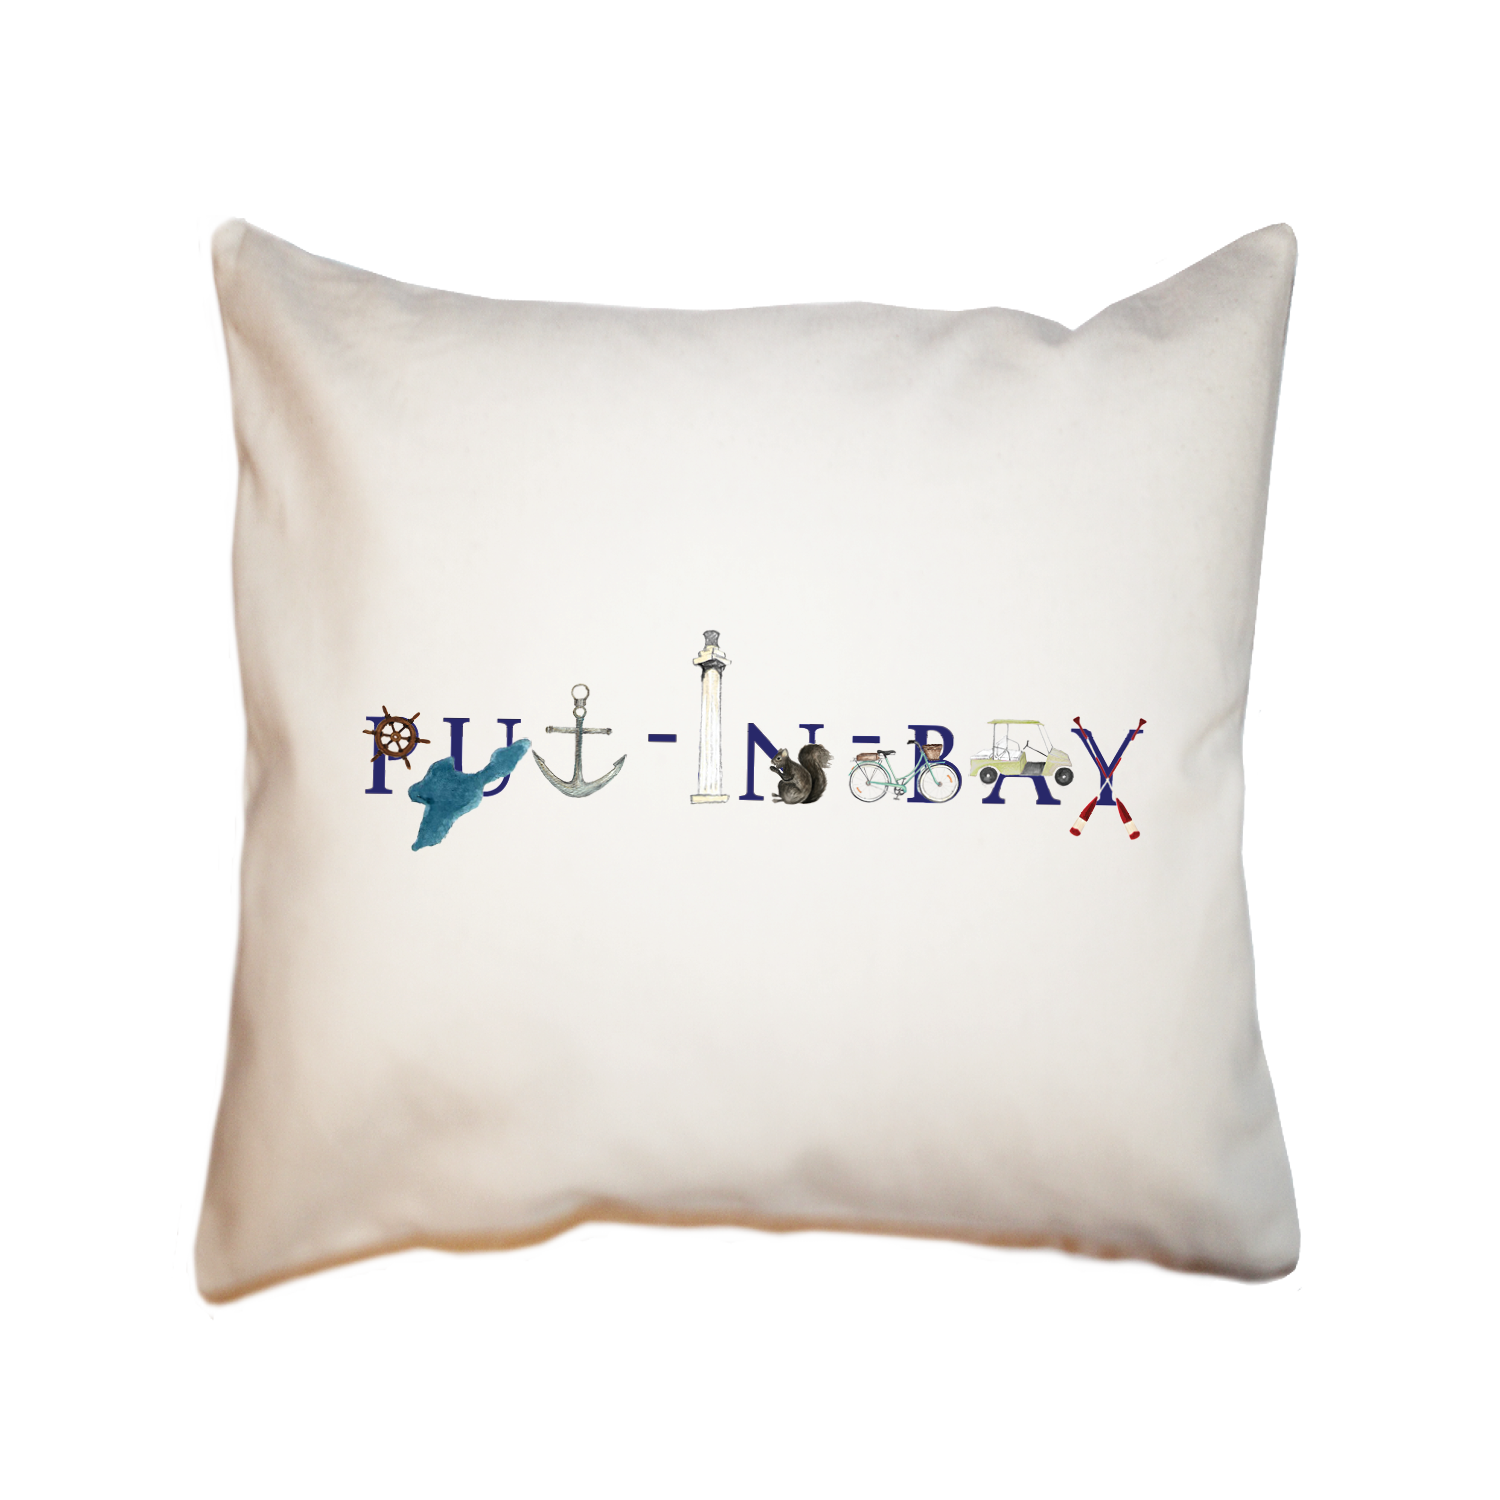 put-in-bay square pillow